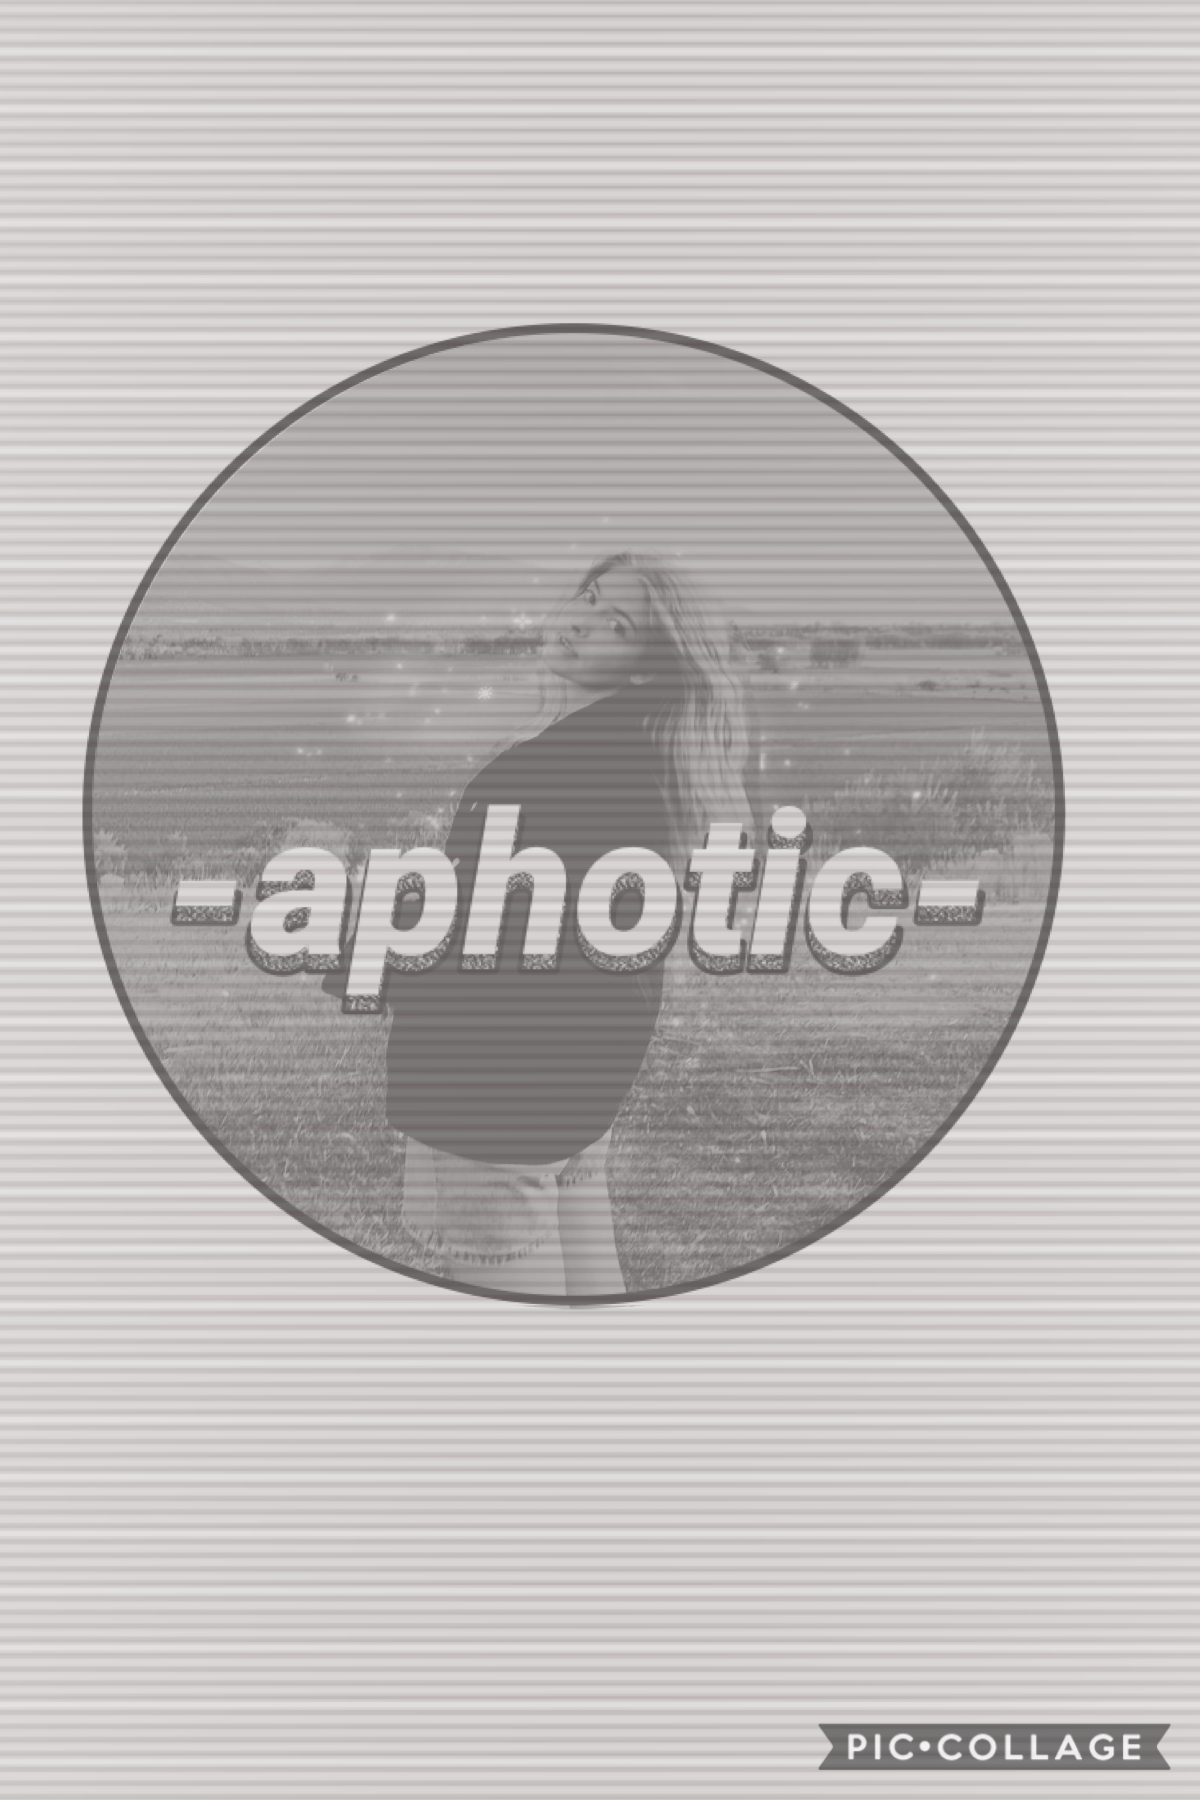 @-aphotic- 
Here it is!!! Love the new username by the way👏🏻